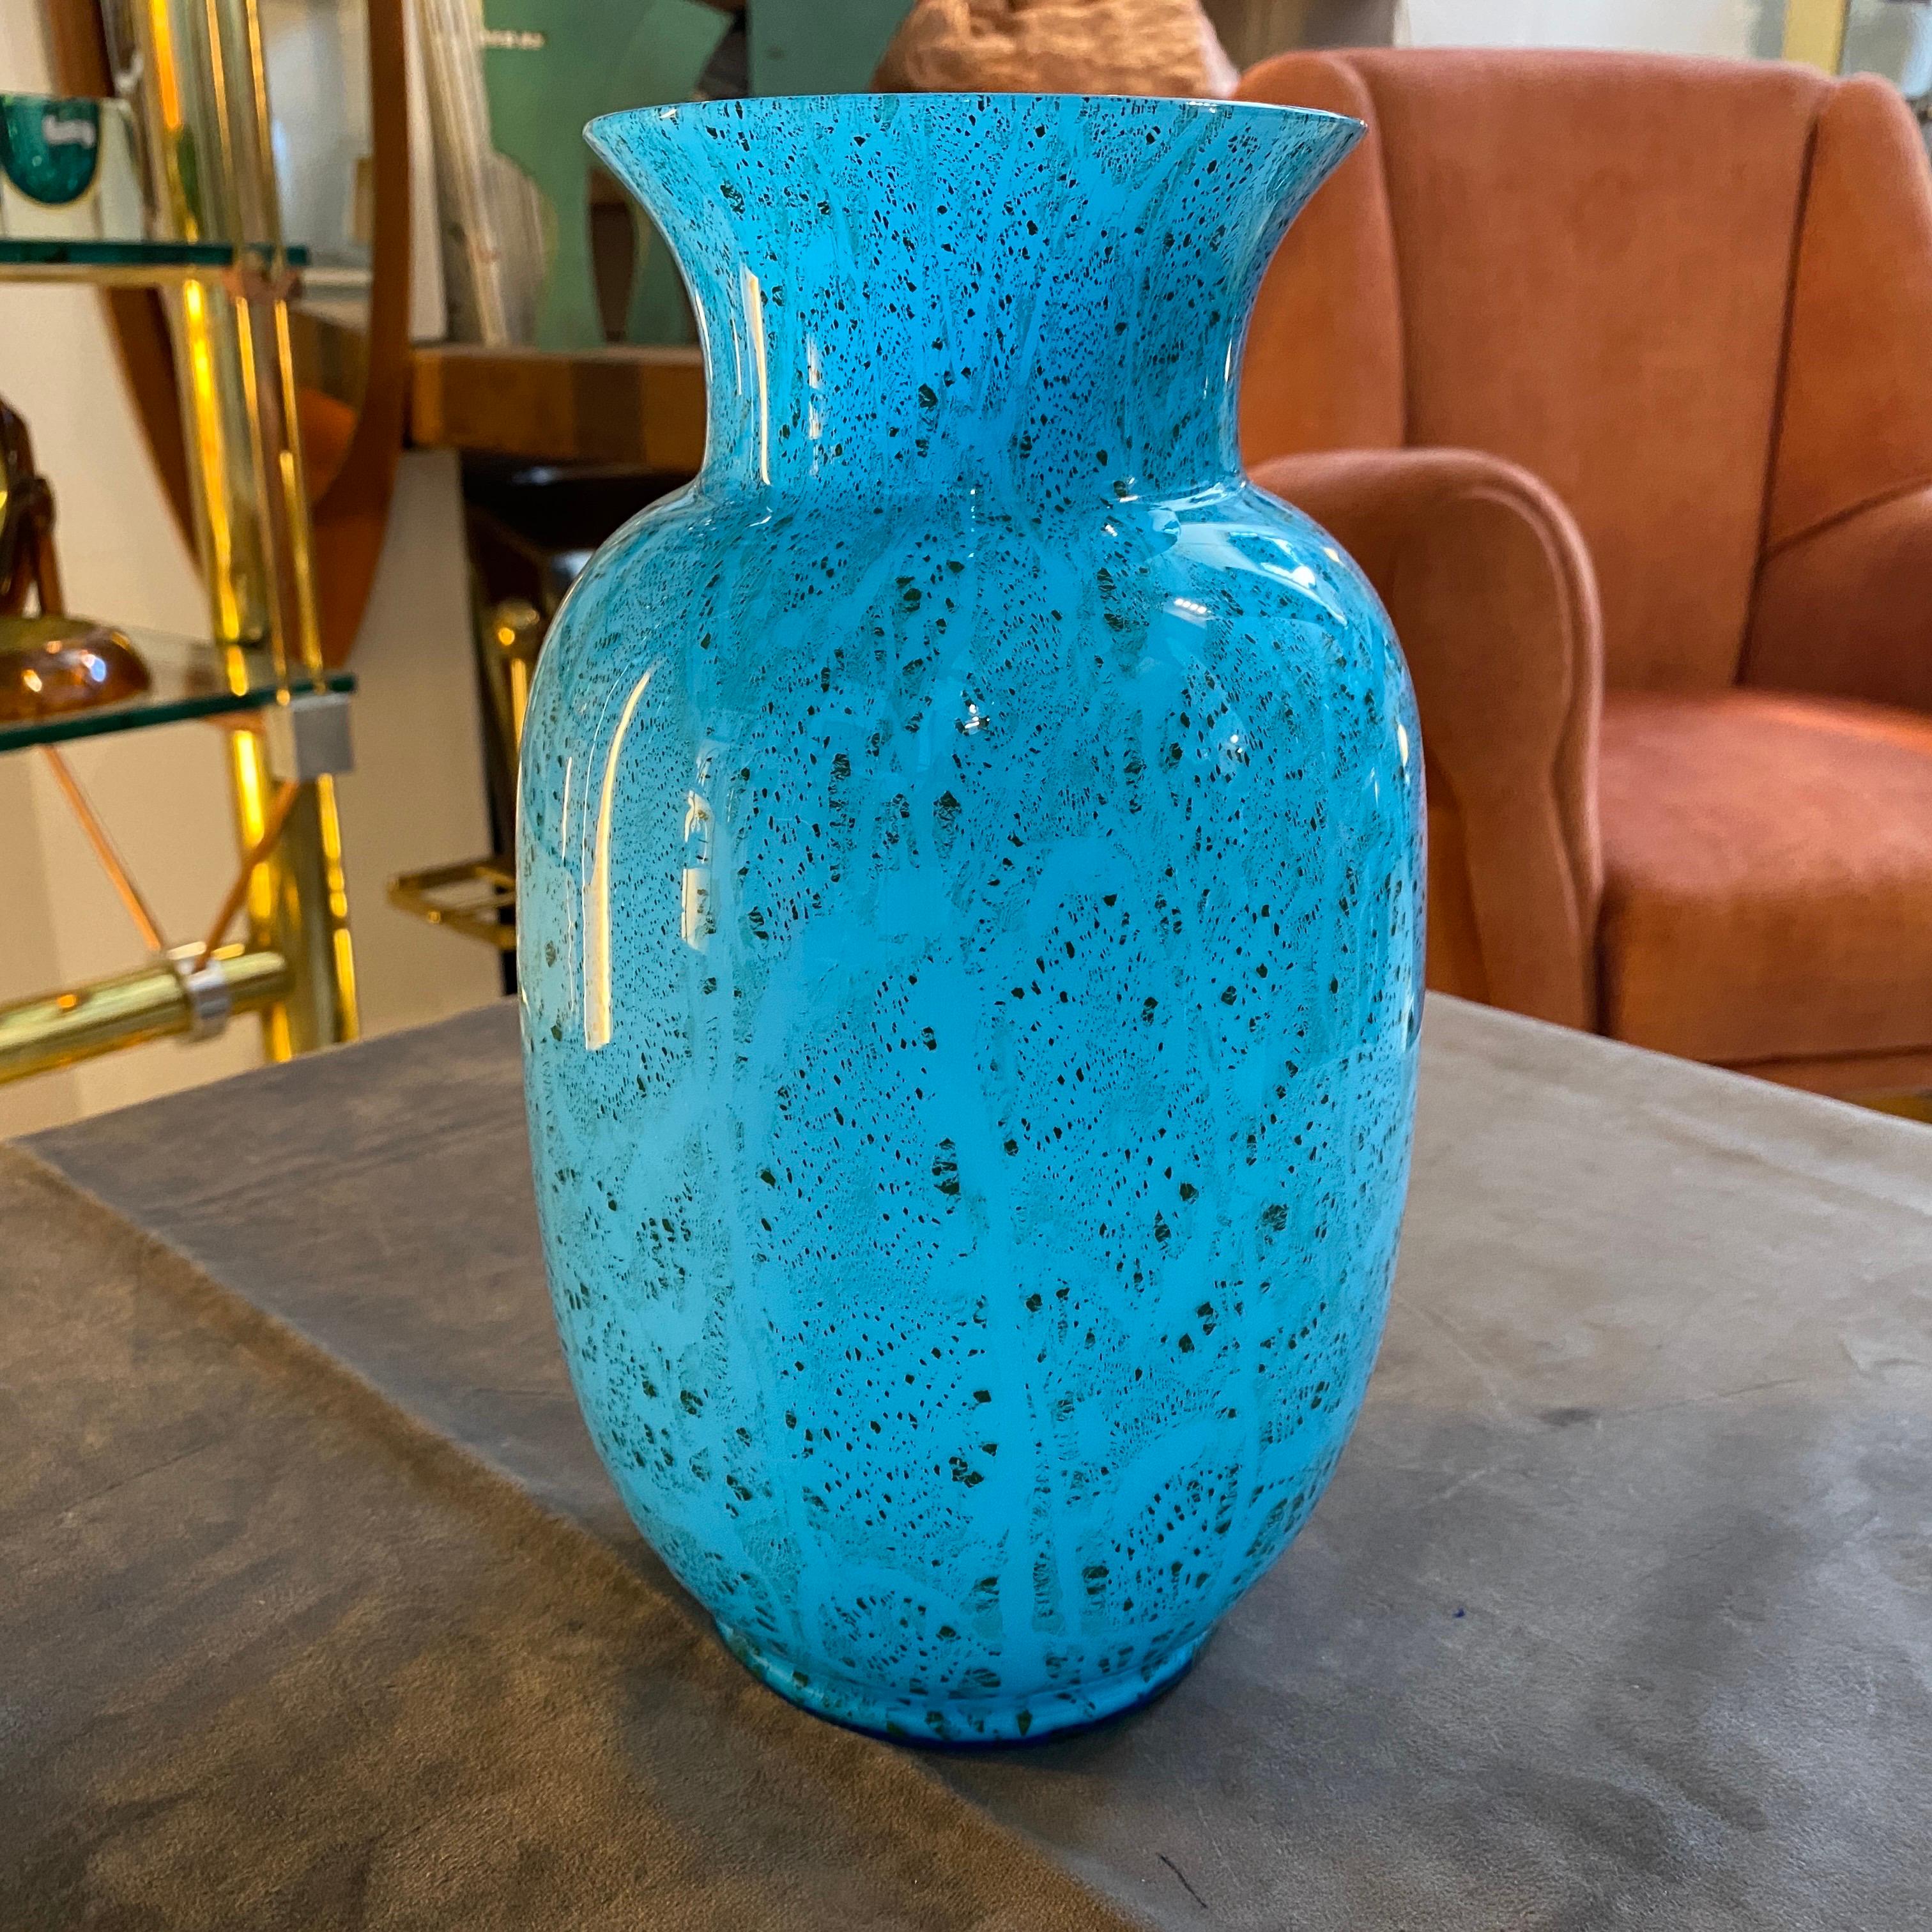 1980s Modernist Turquoise and Black Murano Glass Vase by VeArt For Sale 2